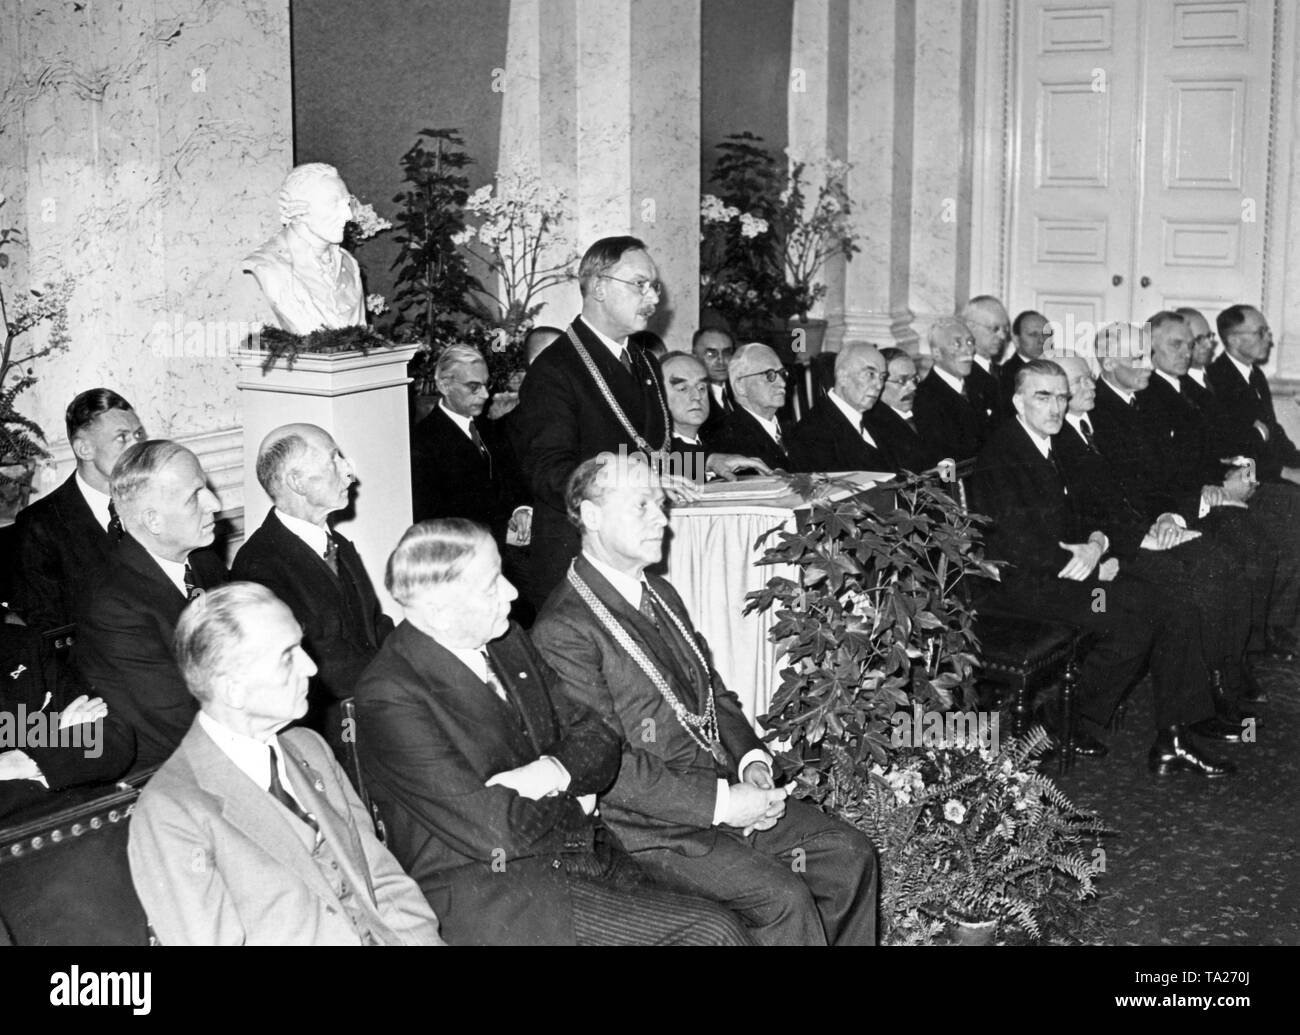 The Vice President of the Academy and Egyptologist, Hermann Grapow, gives a speech to the members. In the first row, professors Theodor Vahlen (mathematician), Hans Stille (geologist), Ludwig Bieberbach (mathematician), Gerhart Rodenwaldt (archaeologist), Eduard Spranger (pedagogue), Ludwig Deubner (altophilologist), Franz Koch (Germanist), Hartung And Max Vasmer (Slavist). Stock Photo